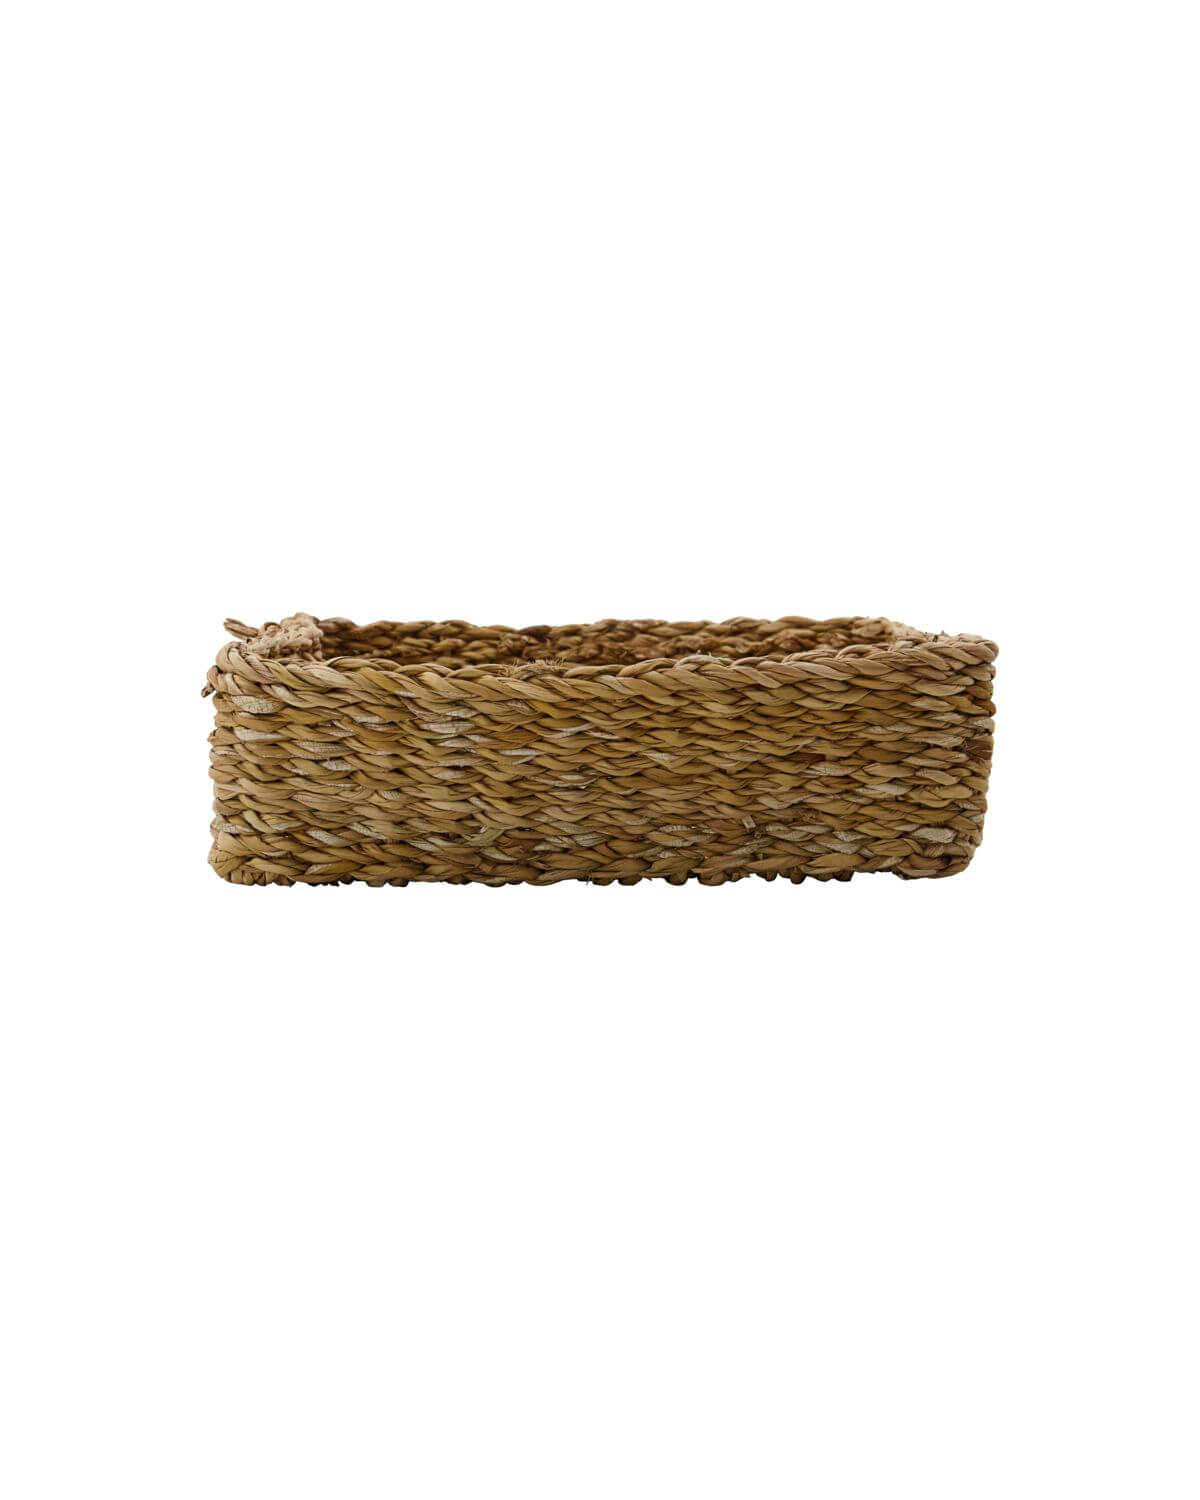 Naba Basket - Square | Seagrass | by House Doctor - Lifestory